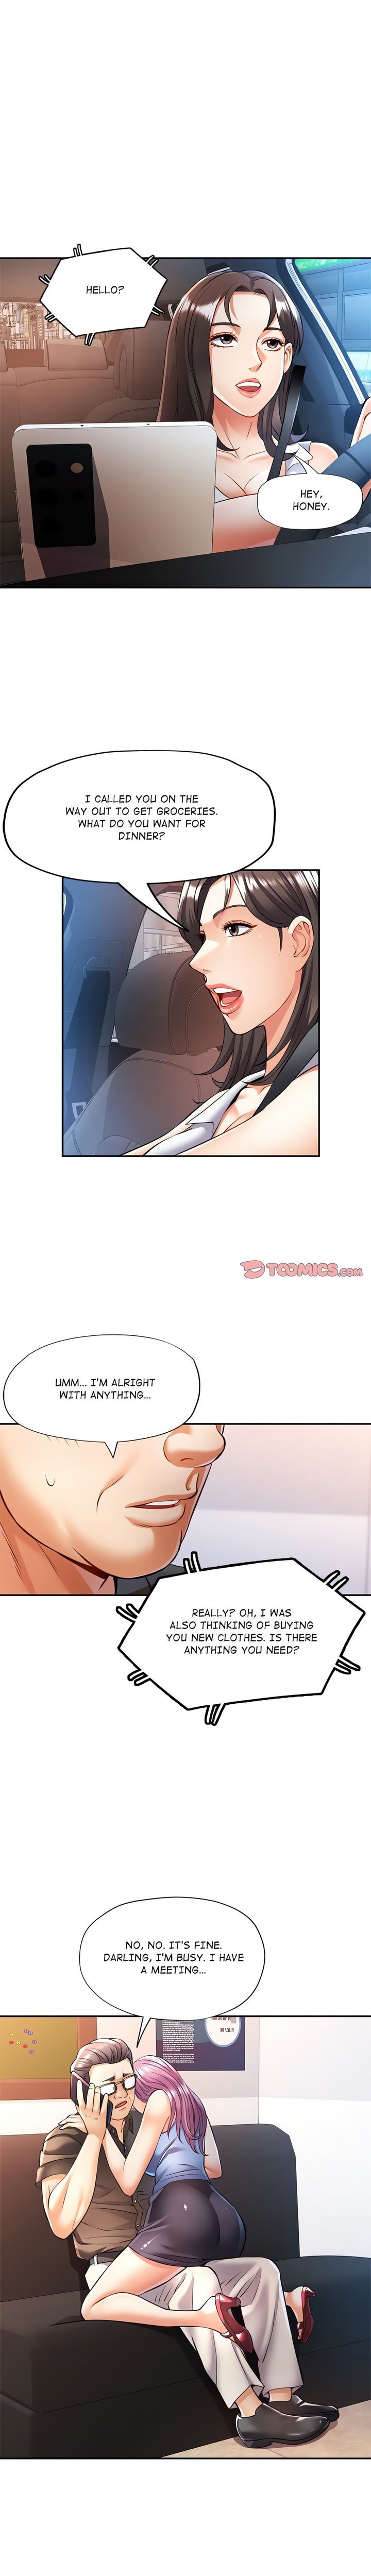 in-her-place-chap-20-9